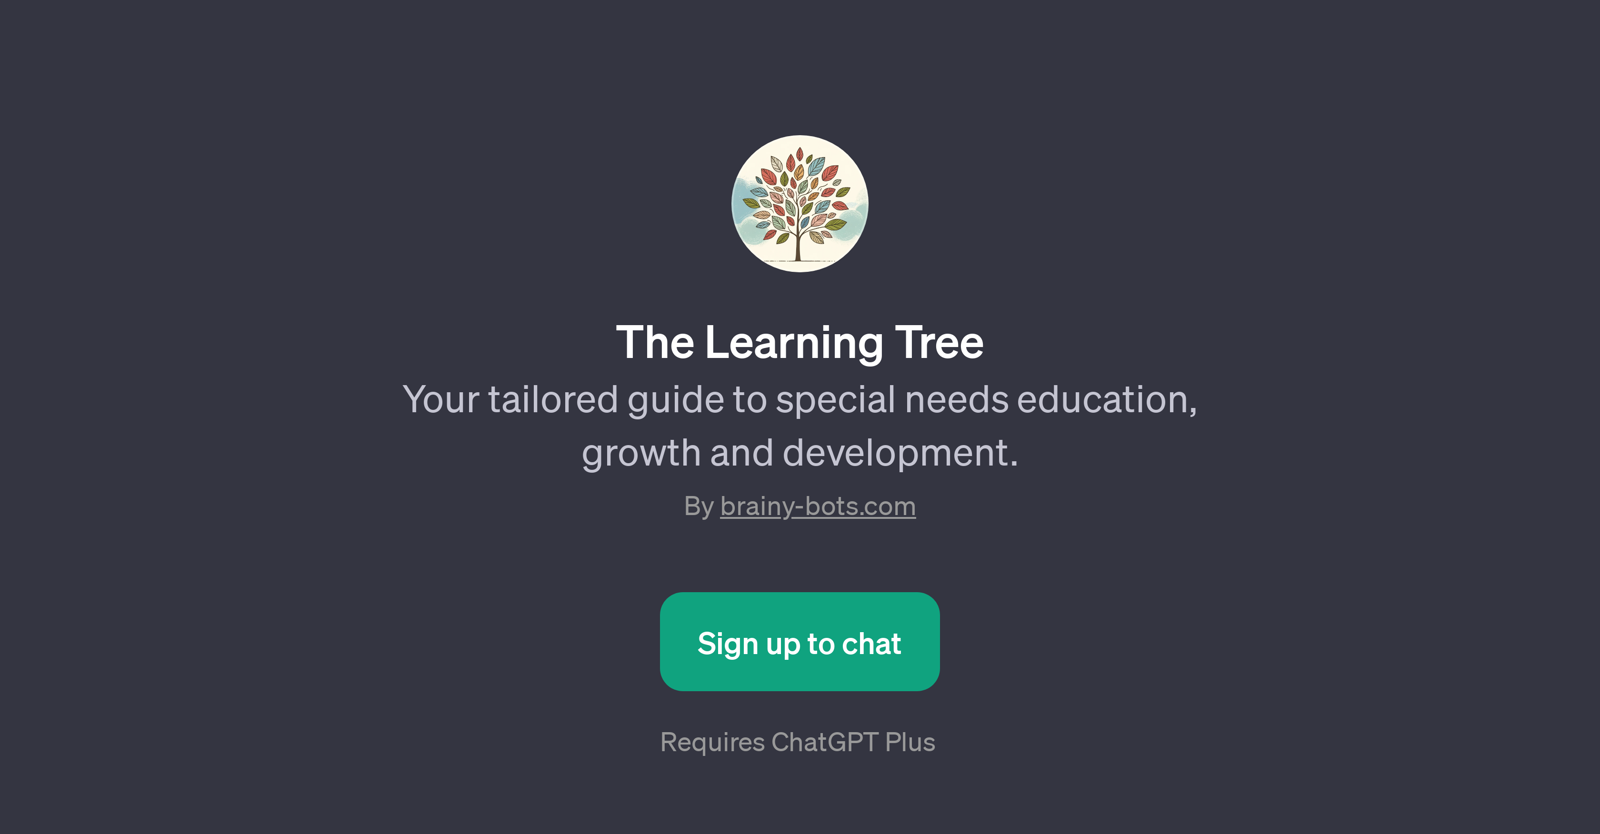 The Learning Tree website